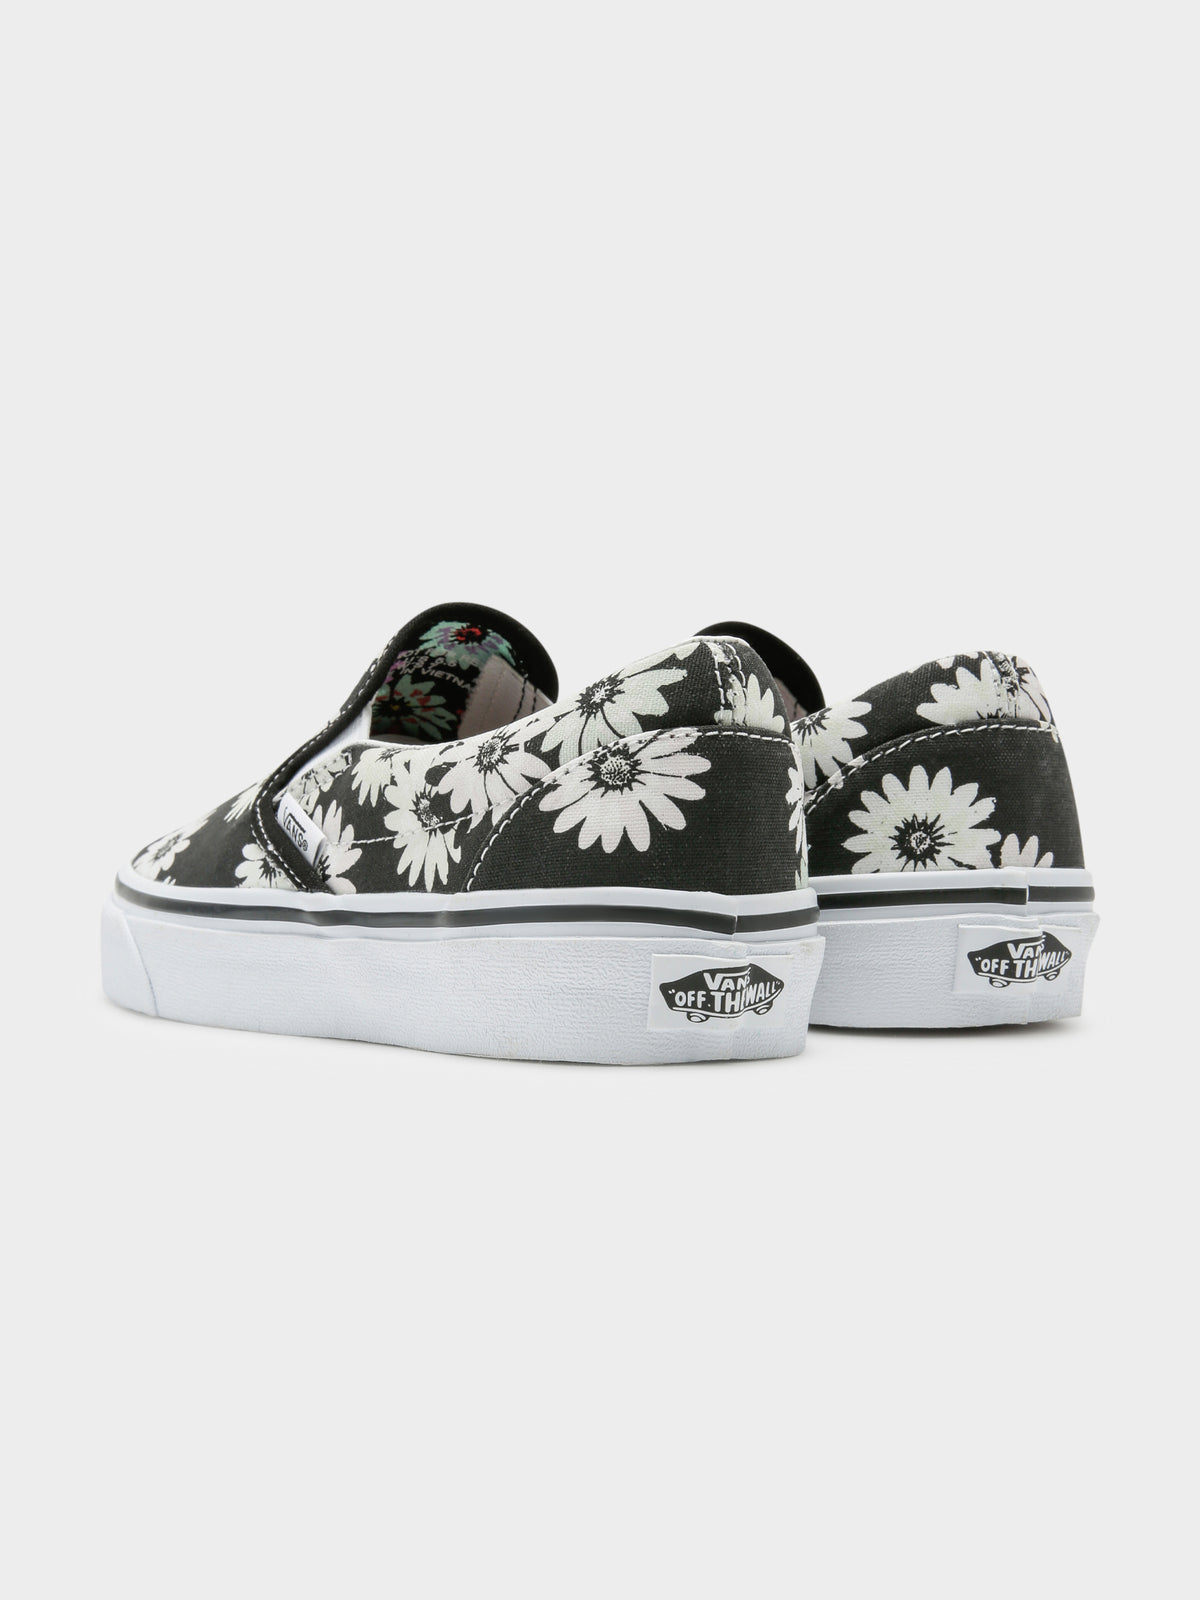 Womens Classic Slip On Sneakers in Peace Floral